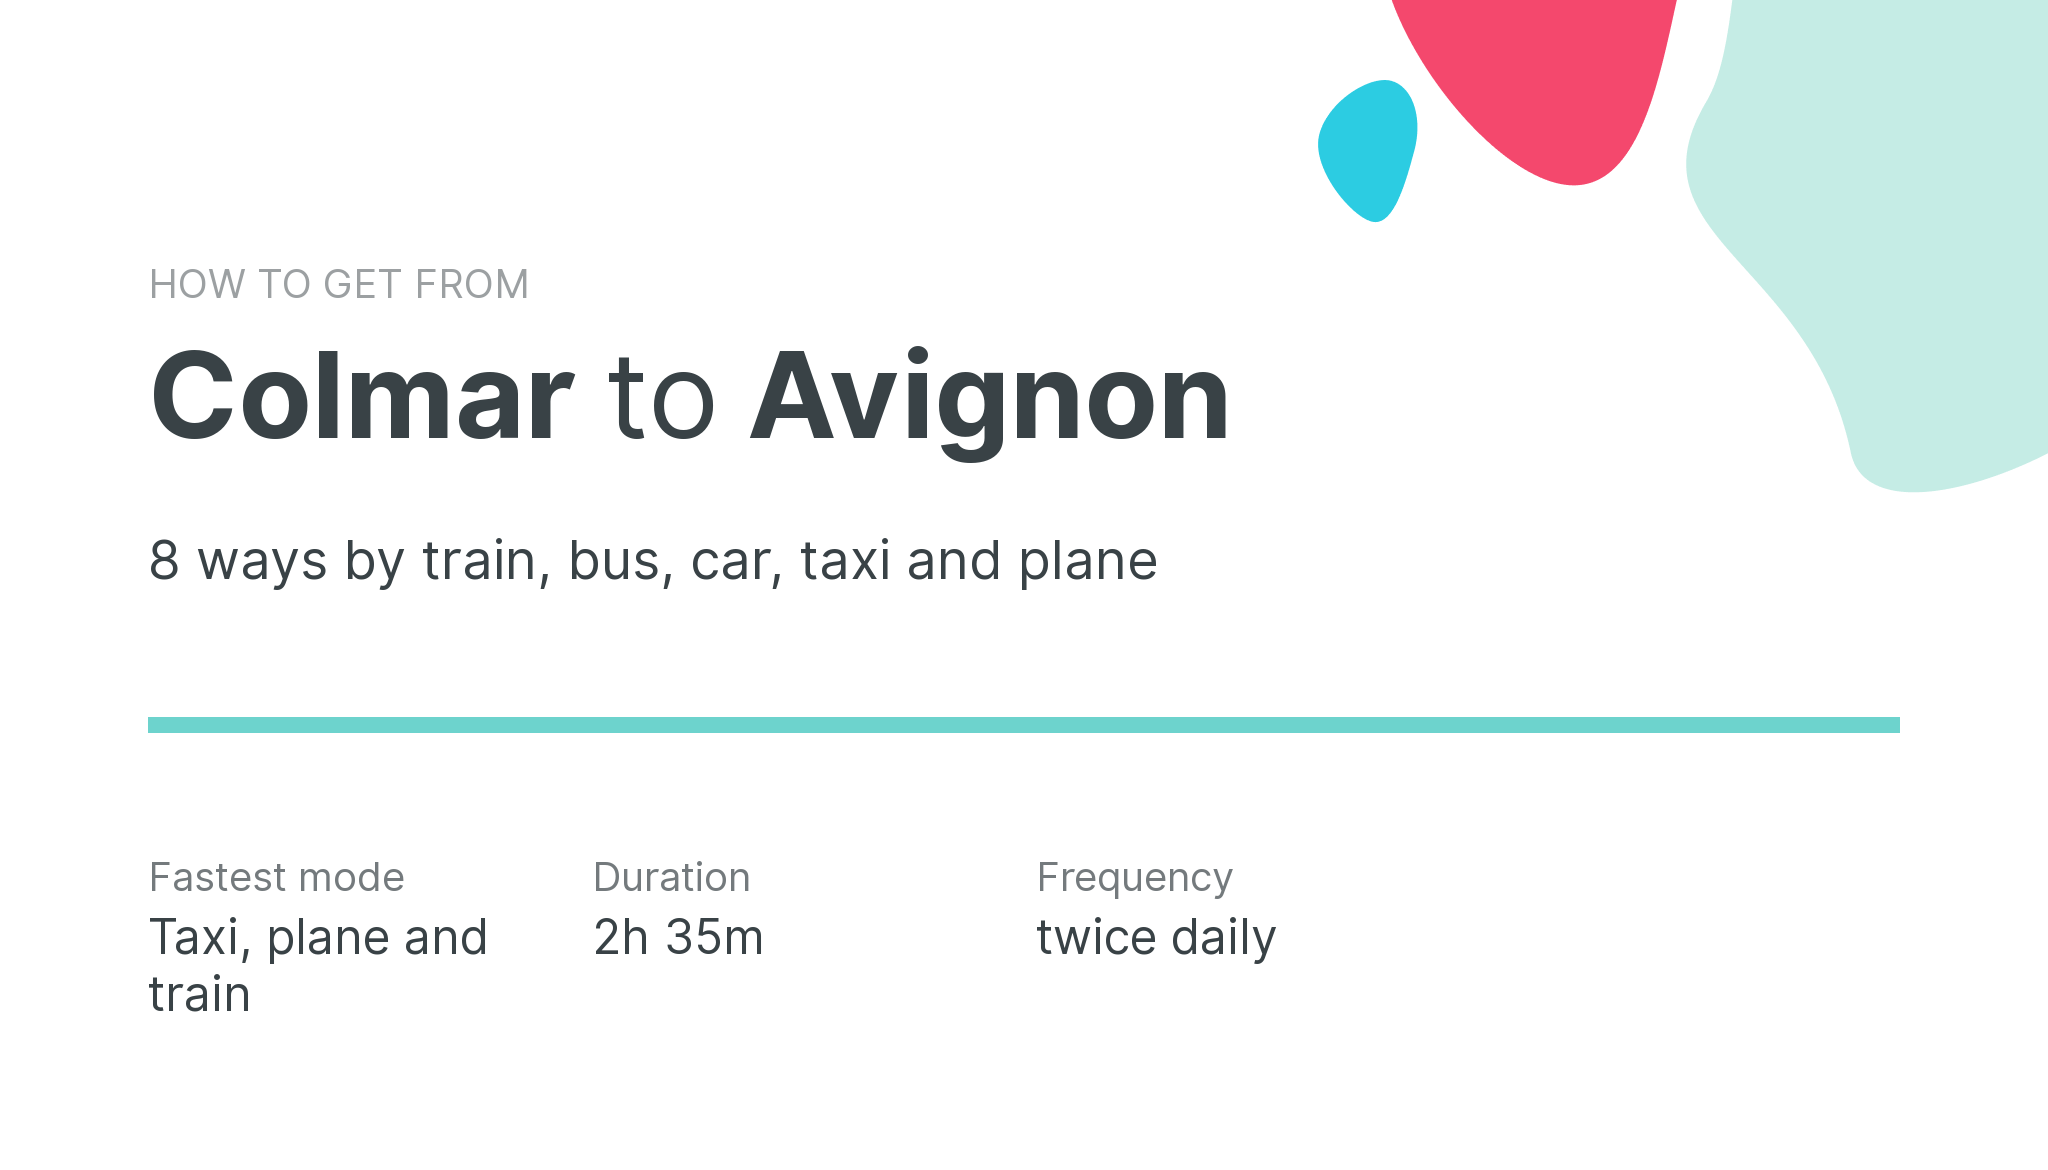 How do I get from Colmar to Avignon